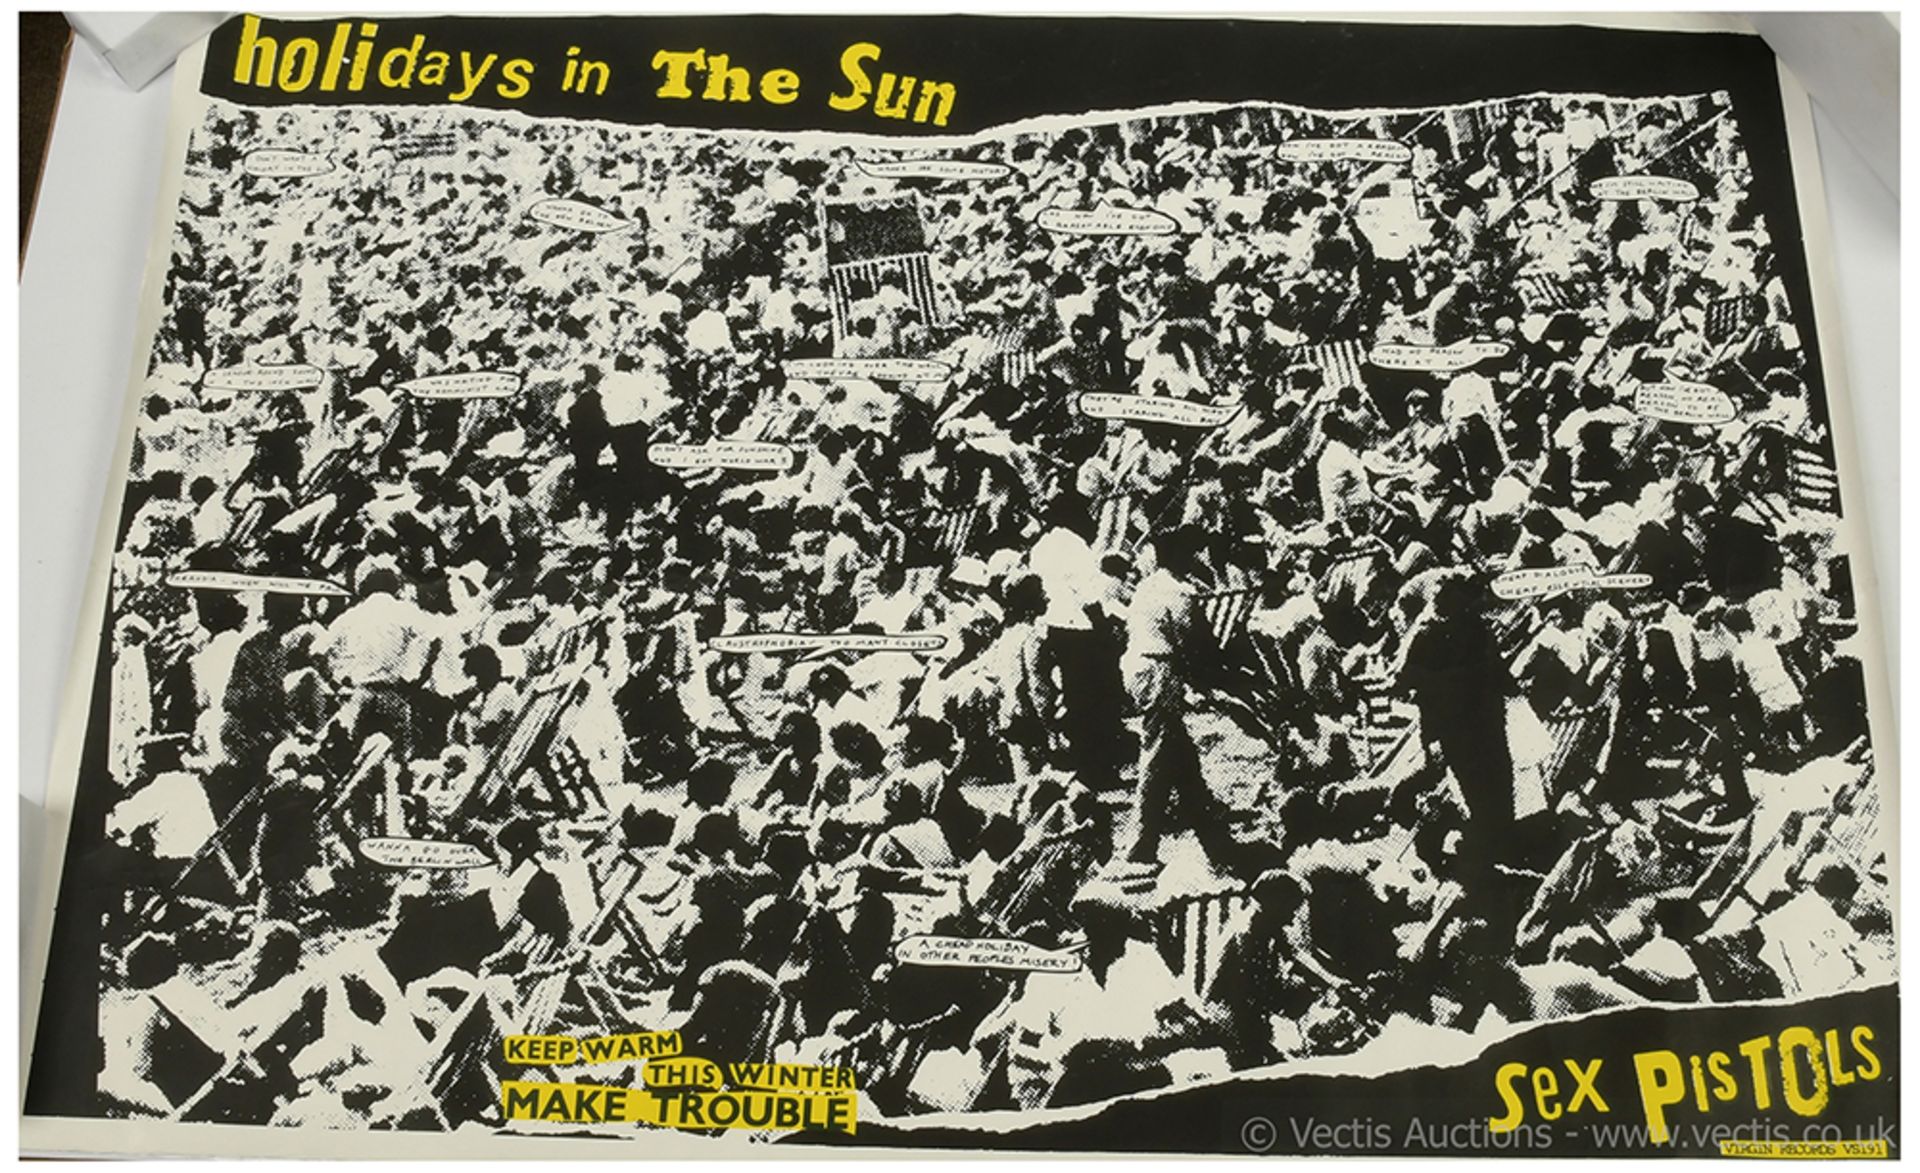 The Sex Pistols - Holidays in the Sun Poster